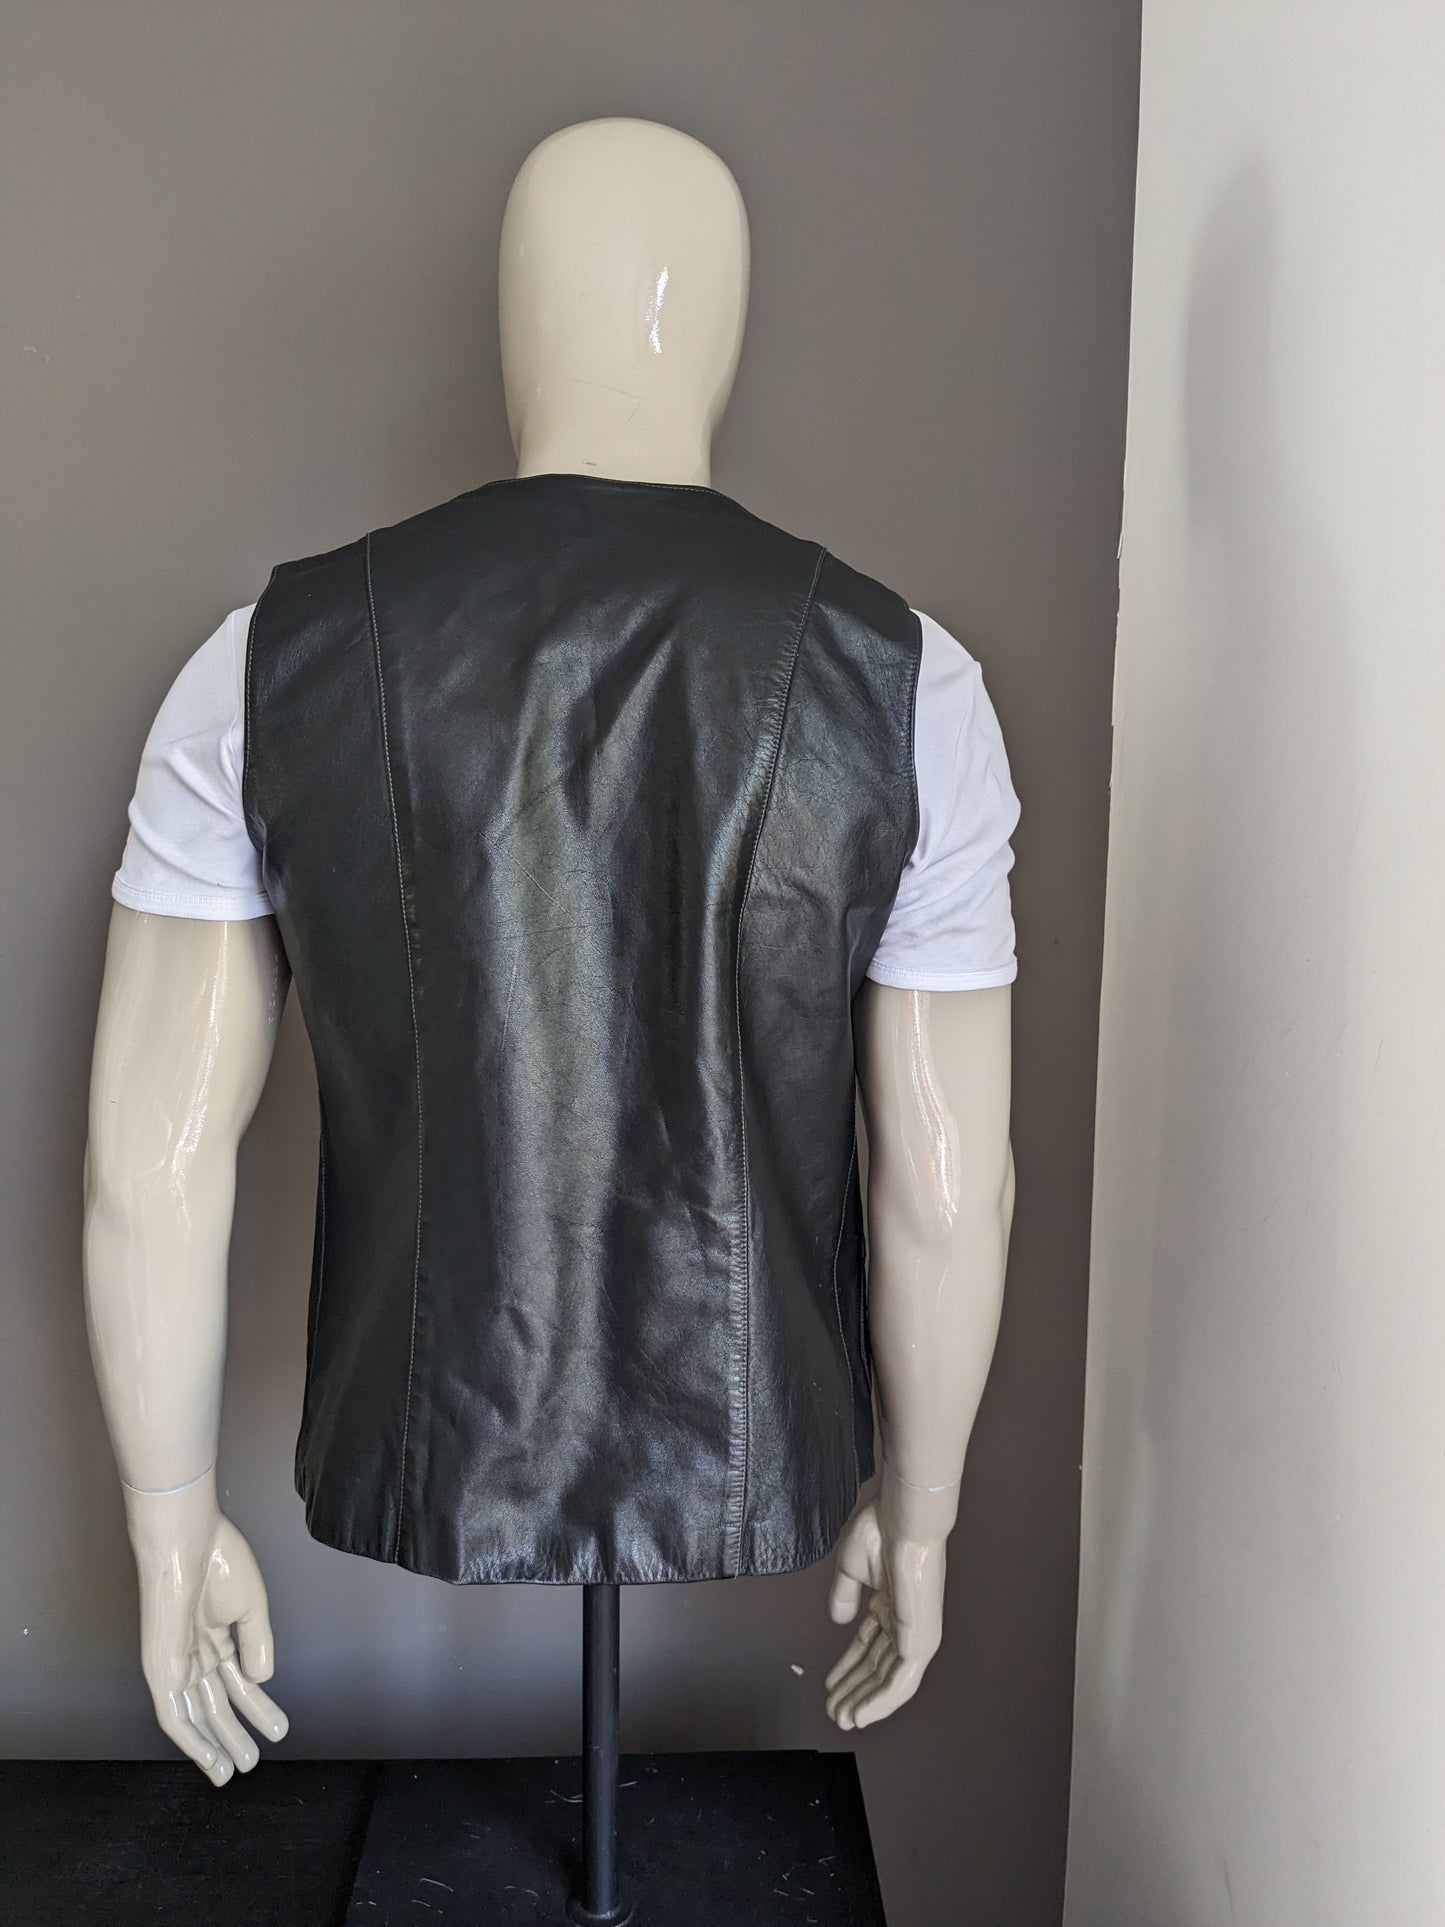 Leather waistcoat without closure. Black colored with silver colored star. Size M / L.